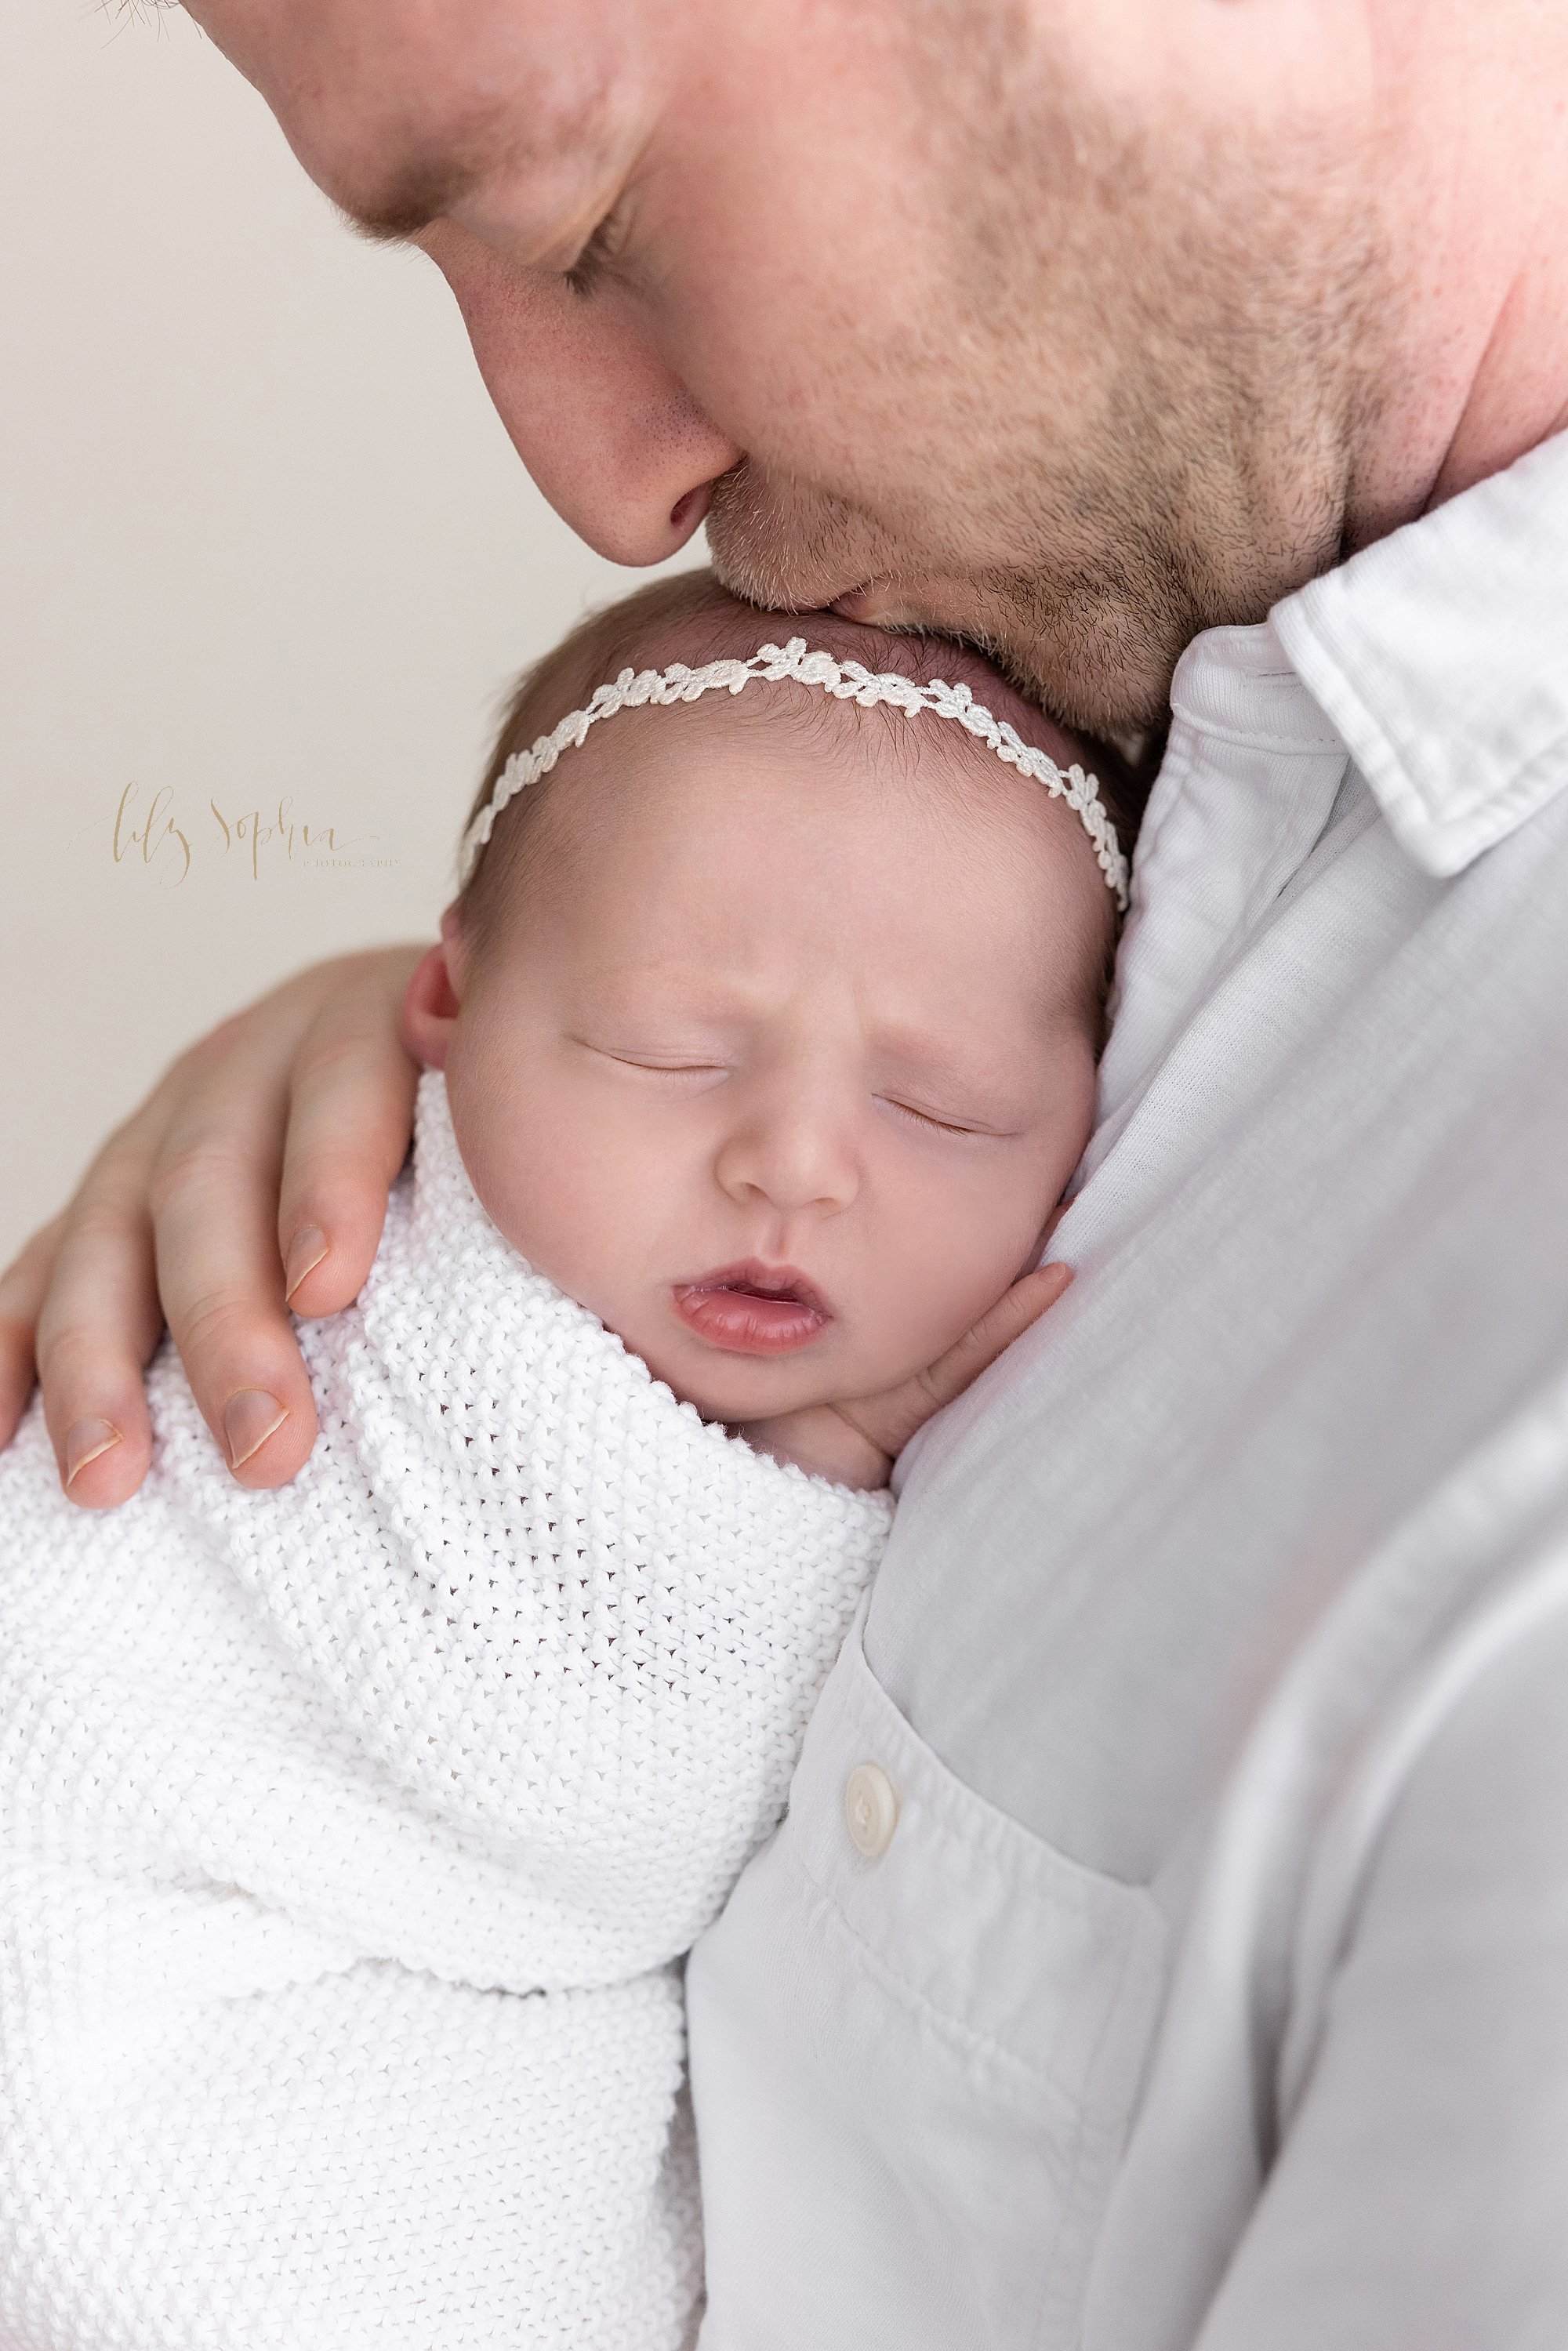  Close-up newborn photo of a newborn baby girl wrapped in a soft crocheted blanket and wearing a delicate headband in her wispy hair as her father holds her against his chest and kisses the top of her head taken in a natural light studio near Kirkwoo